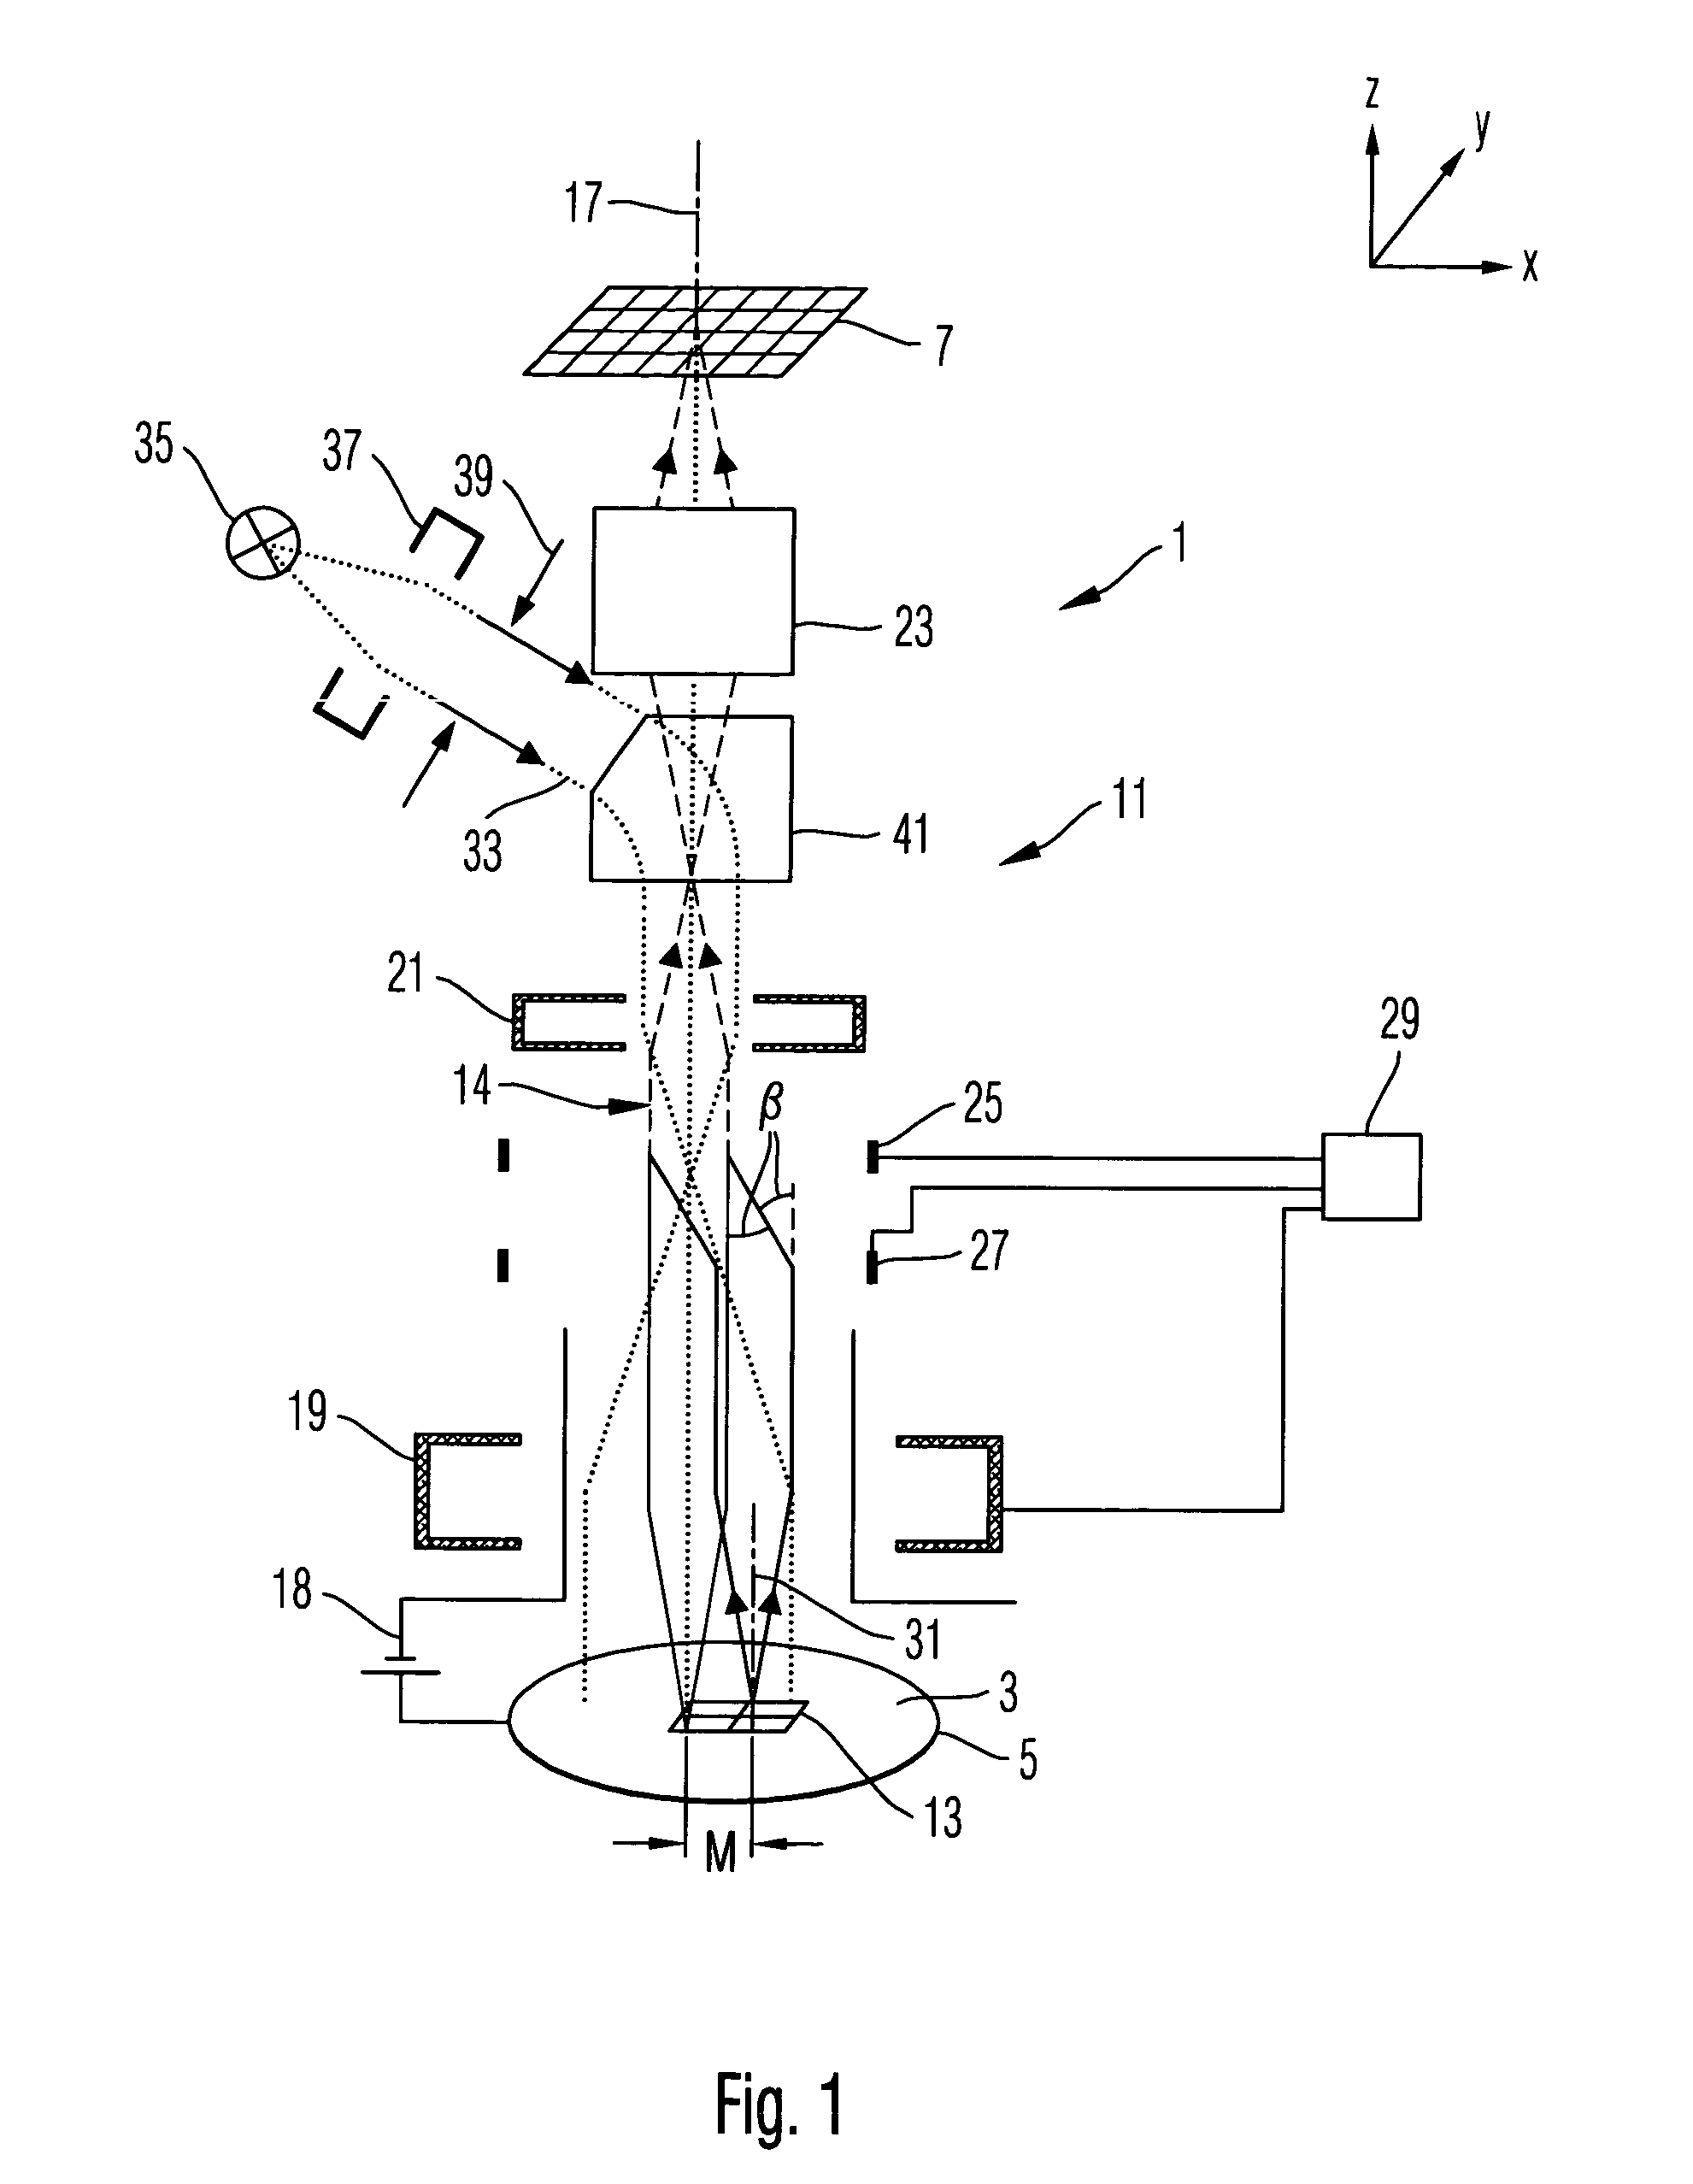 Particle-optical apparatus and method for operating the same